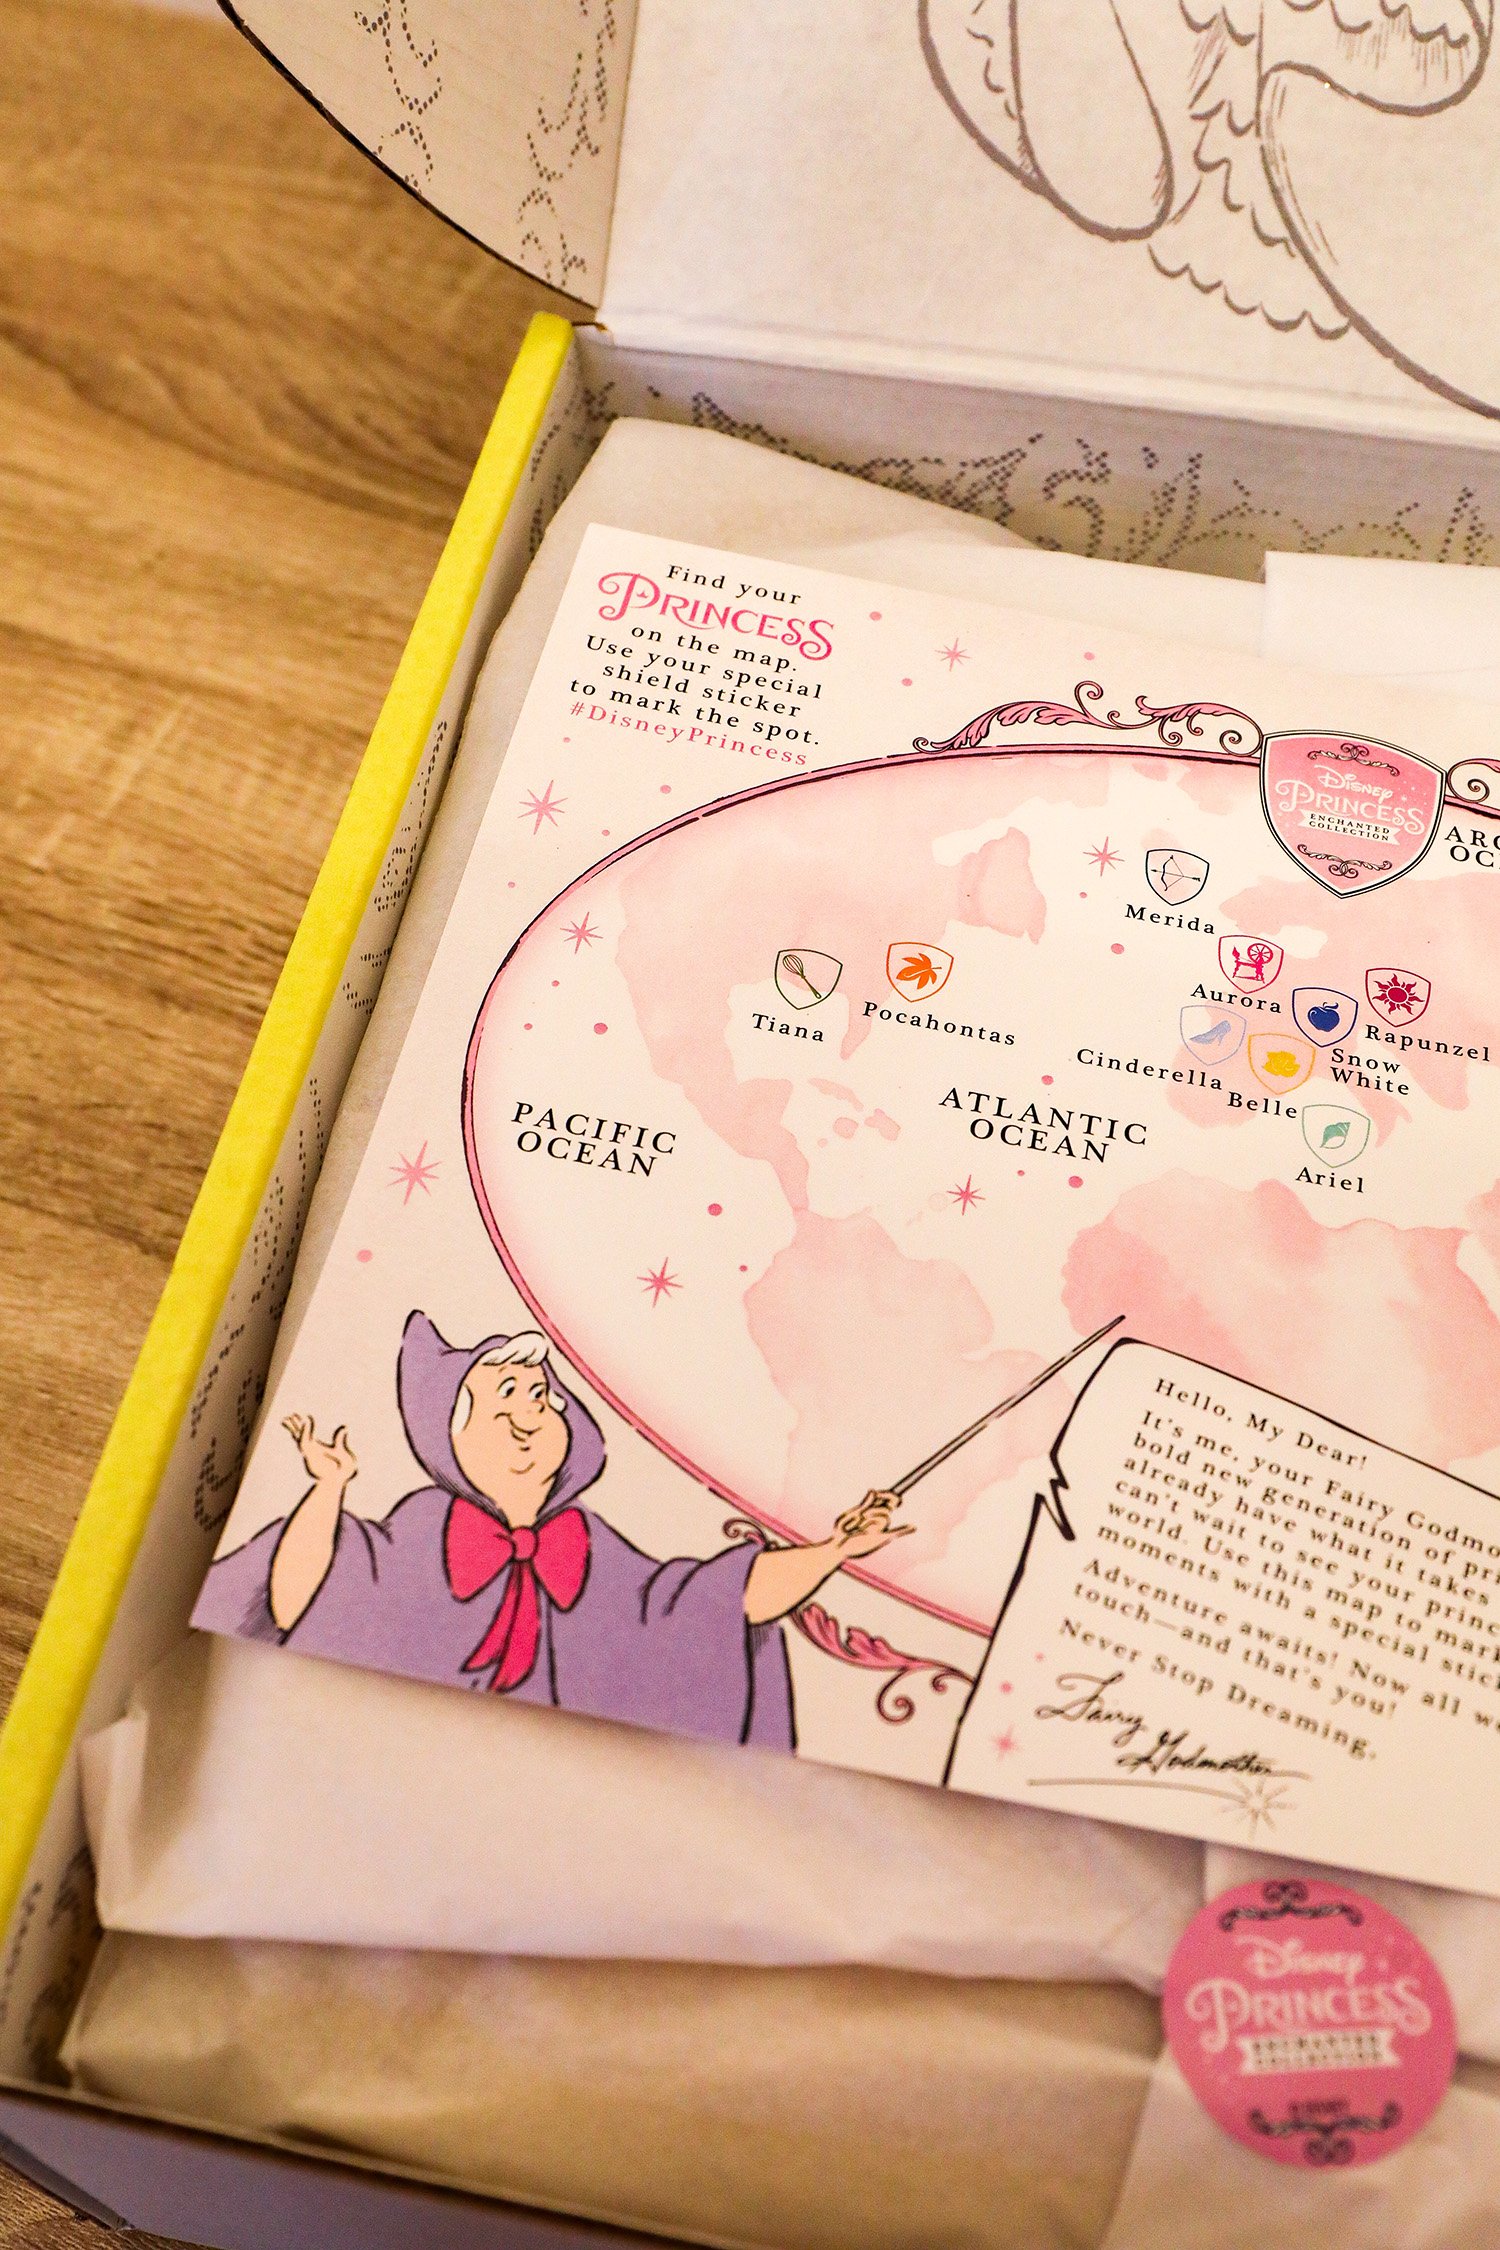 Want to know what's inside the new Disney Princess Subscription Box? This article shows every detail!